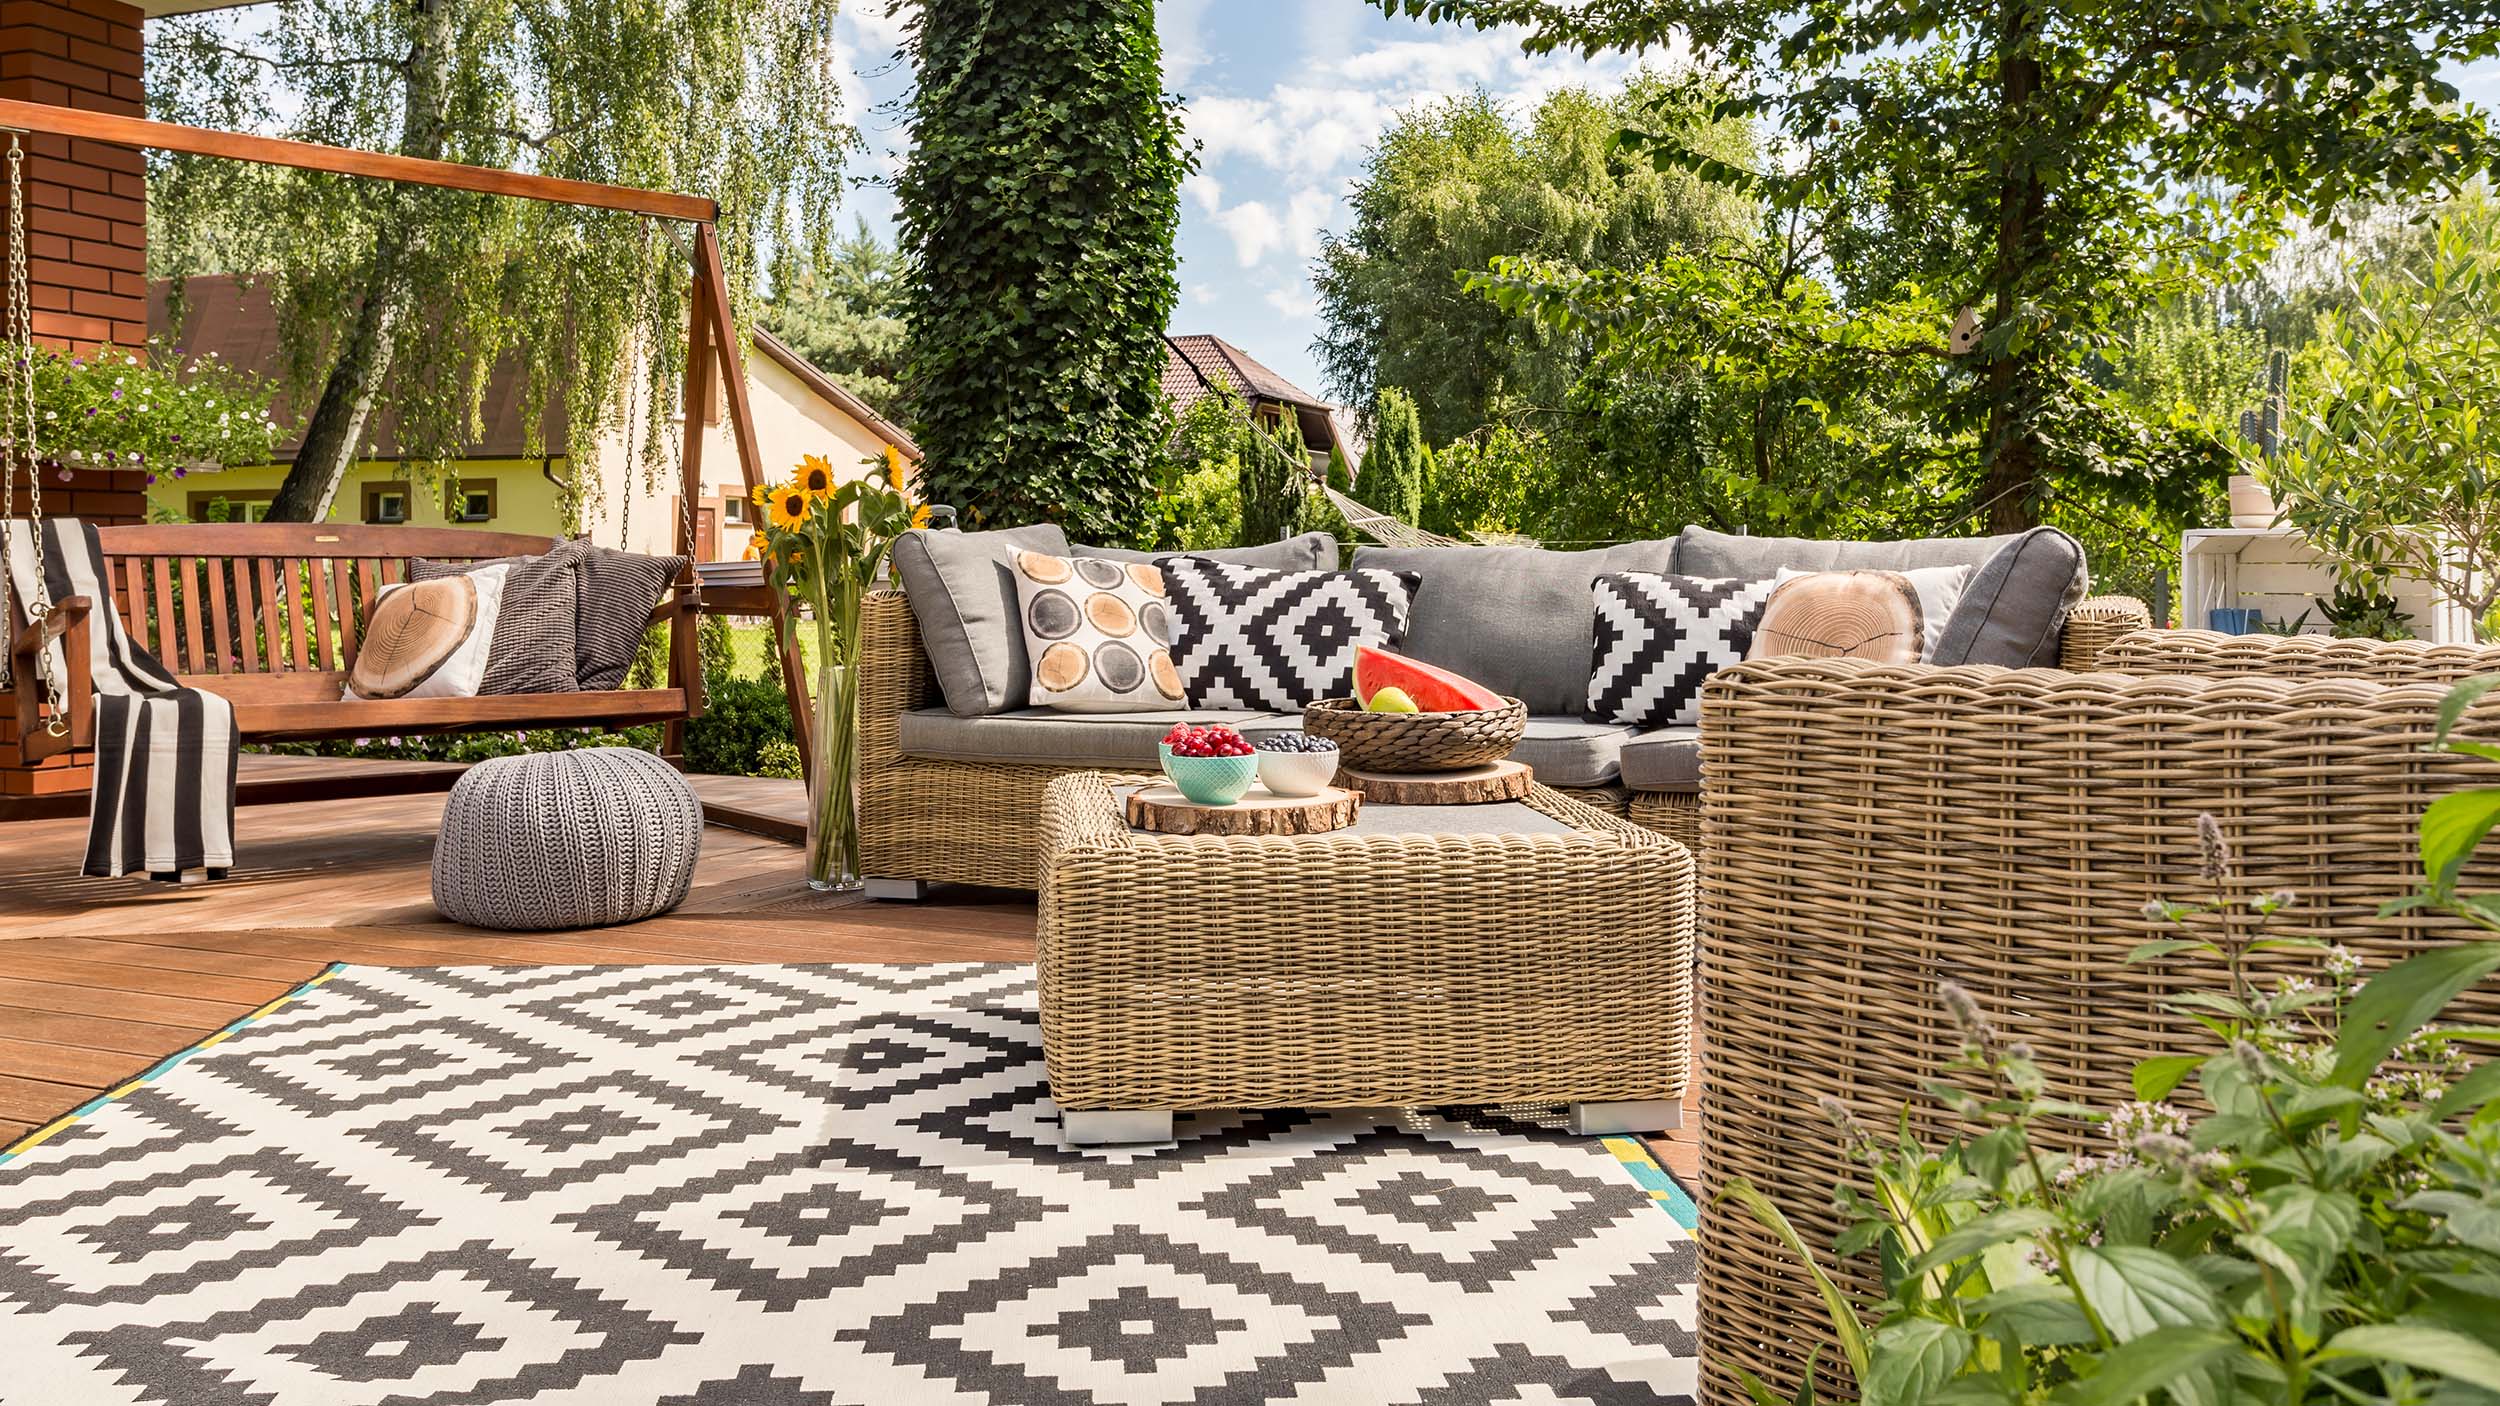 How to clean outdoor furniture for long-lasting use